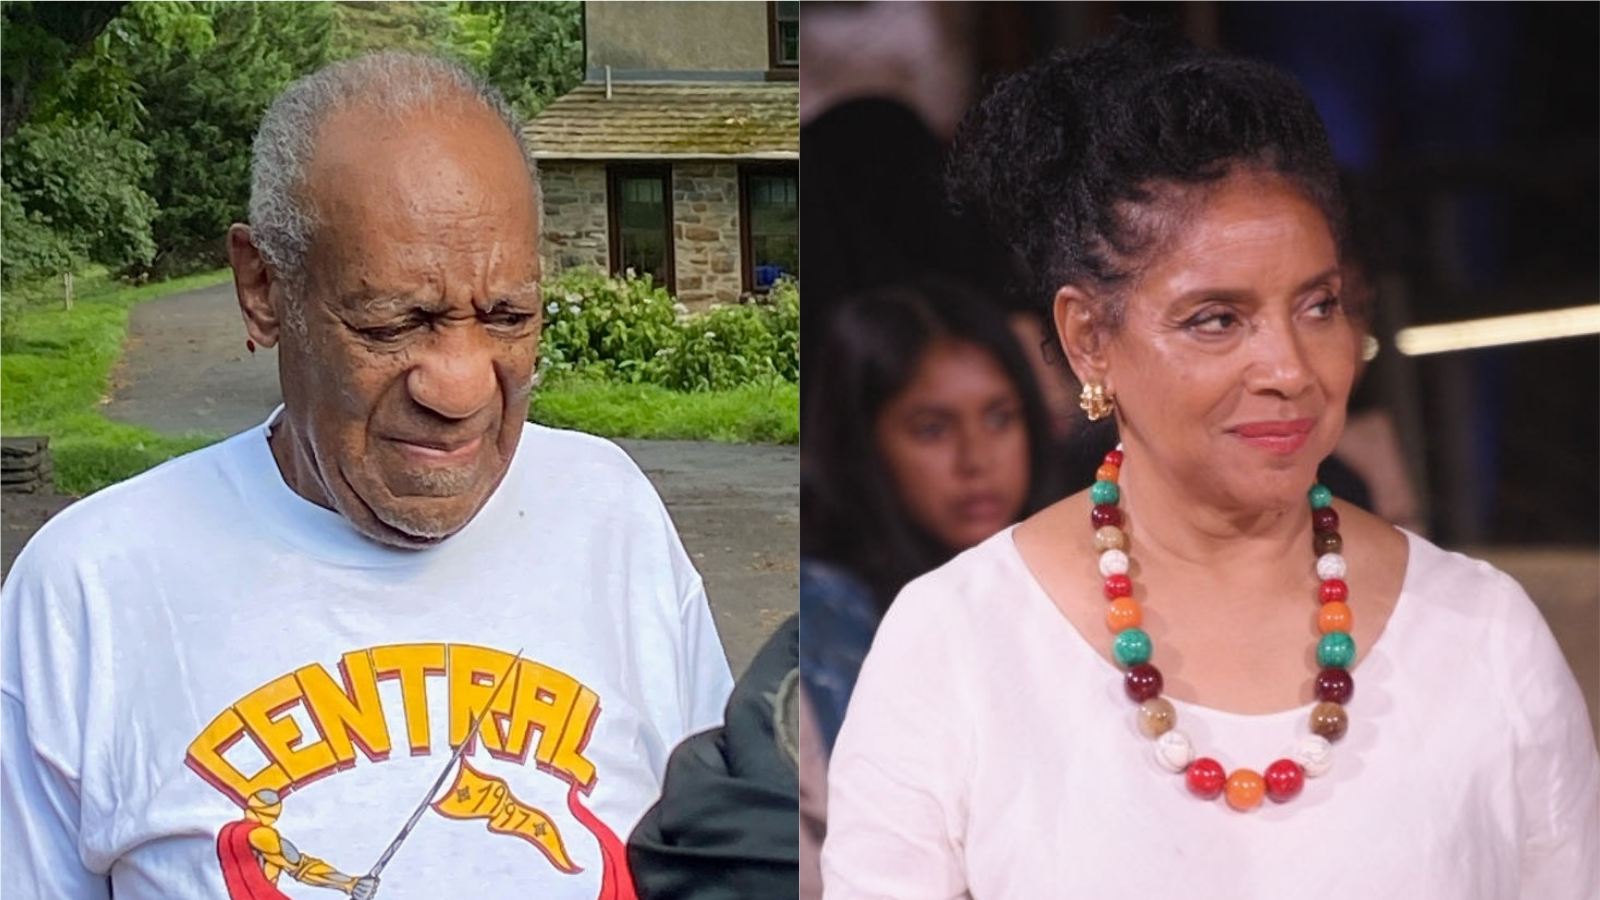 Bill Cosby Blasts Howard University For Speaking Out On Phylicia Rashad's Support Of Disgraced Star